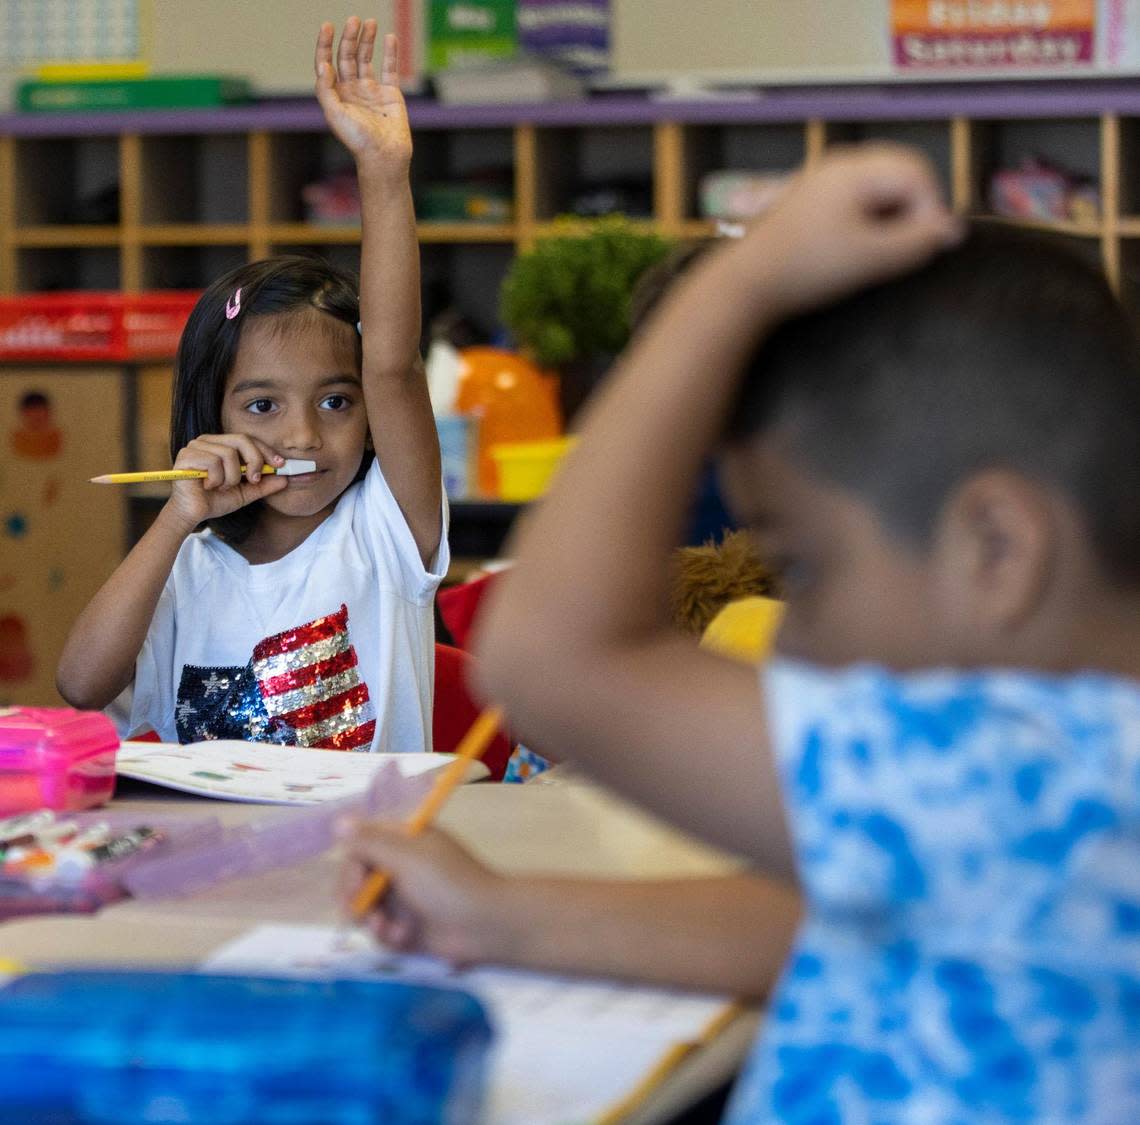 Weatherstone Elementary School first grader Rishika Roy raises her hand with a question during spelling instruction in Jennifer Ivarsson’s class on Friday, September 16, 2022 in Cary, N.C.